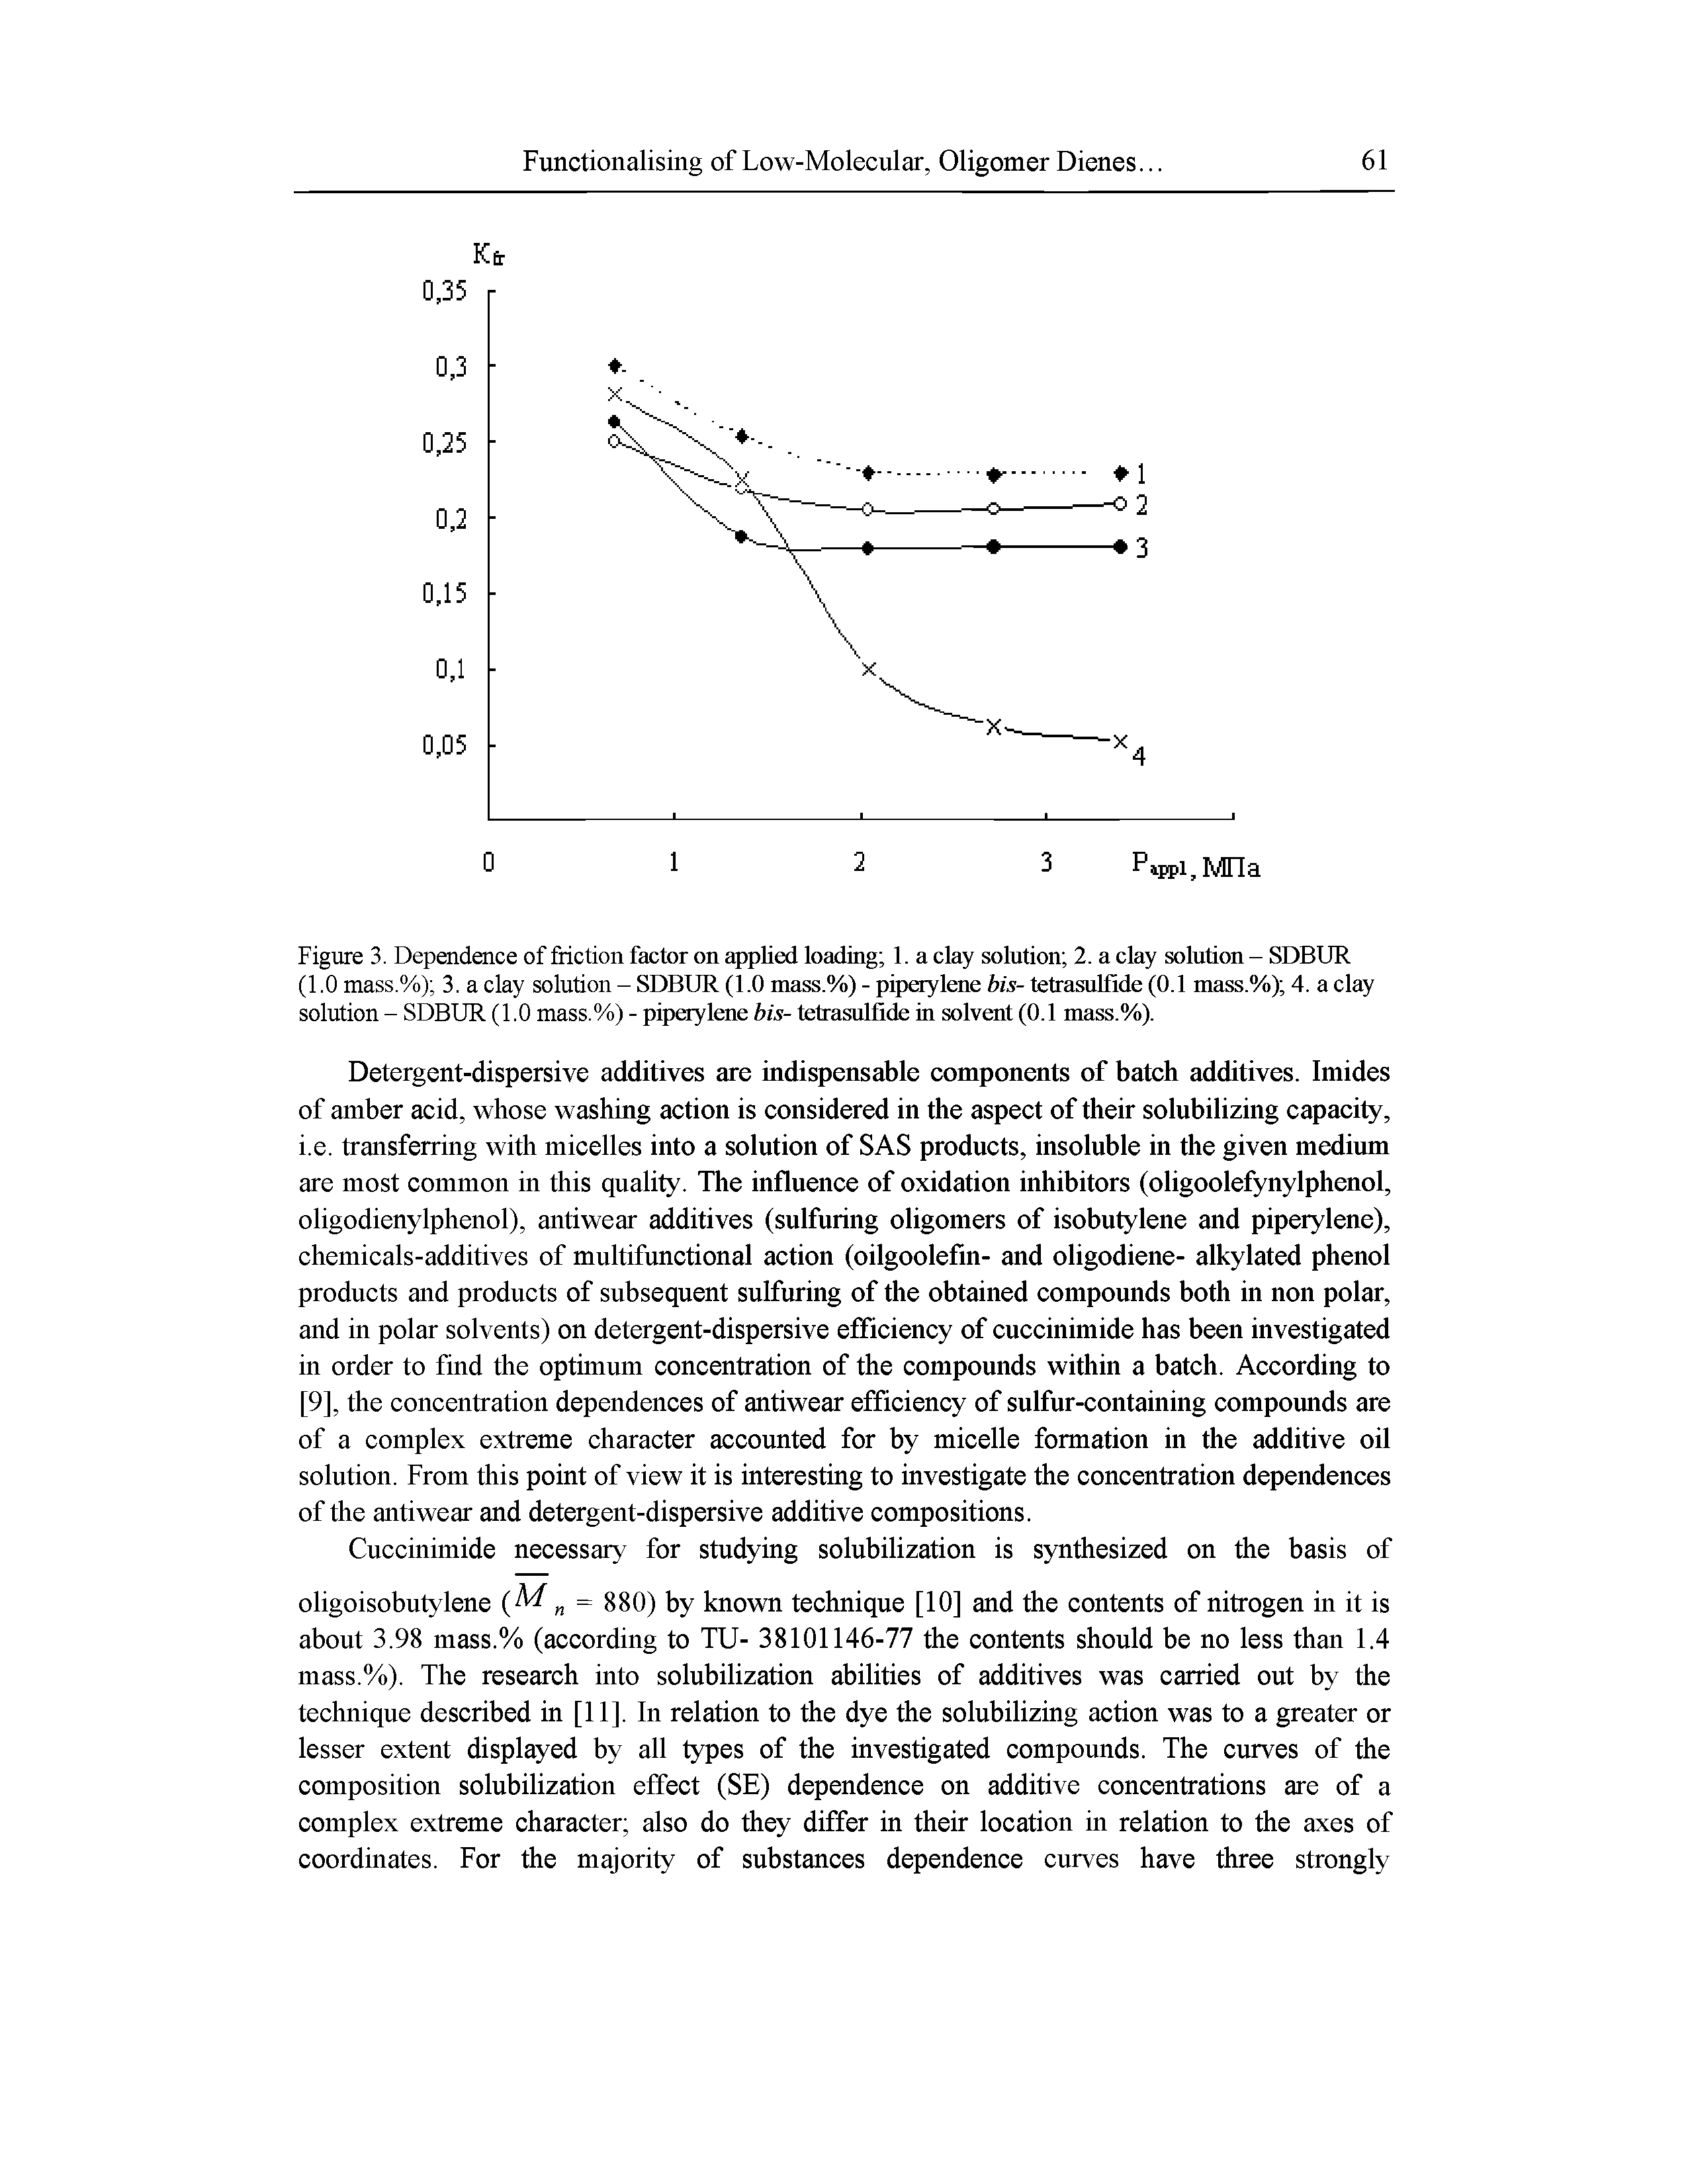 Figure 3. Dependence of friction factor on applied loading 1. a clay solution 2. a clay solution - SDBUR (1.0mass.%) 3. aclay solution - SDISUR (1.0 mass.%) - piperylenc bis- tetrasullide (0.1 mass.%) 4. aclay solution - SDBUR (1.0 mass.%) - piperylene bis- tetrasulfide in solvent (0.1 mass.%).